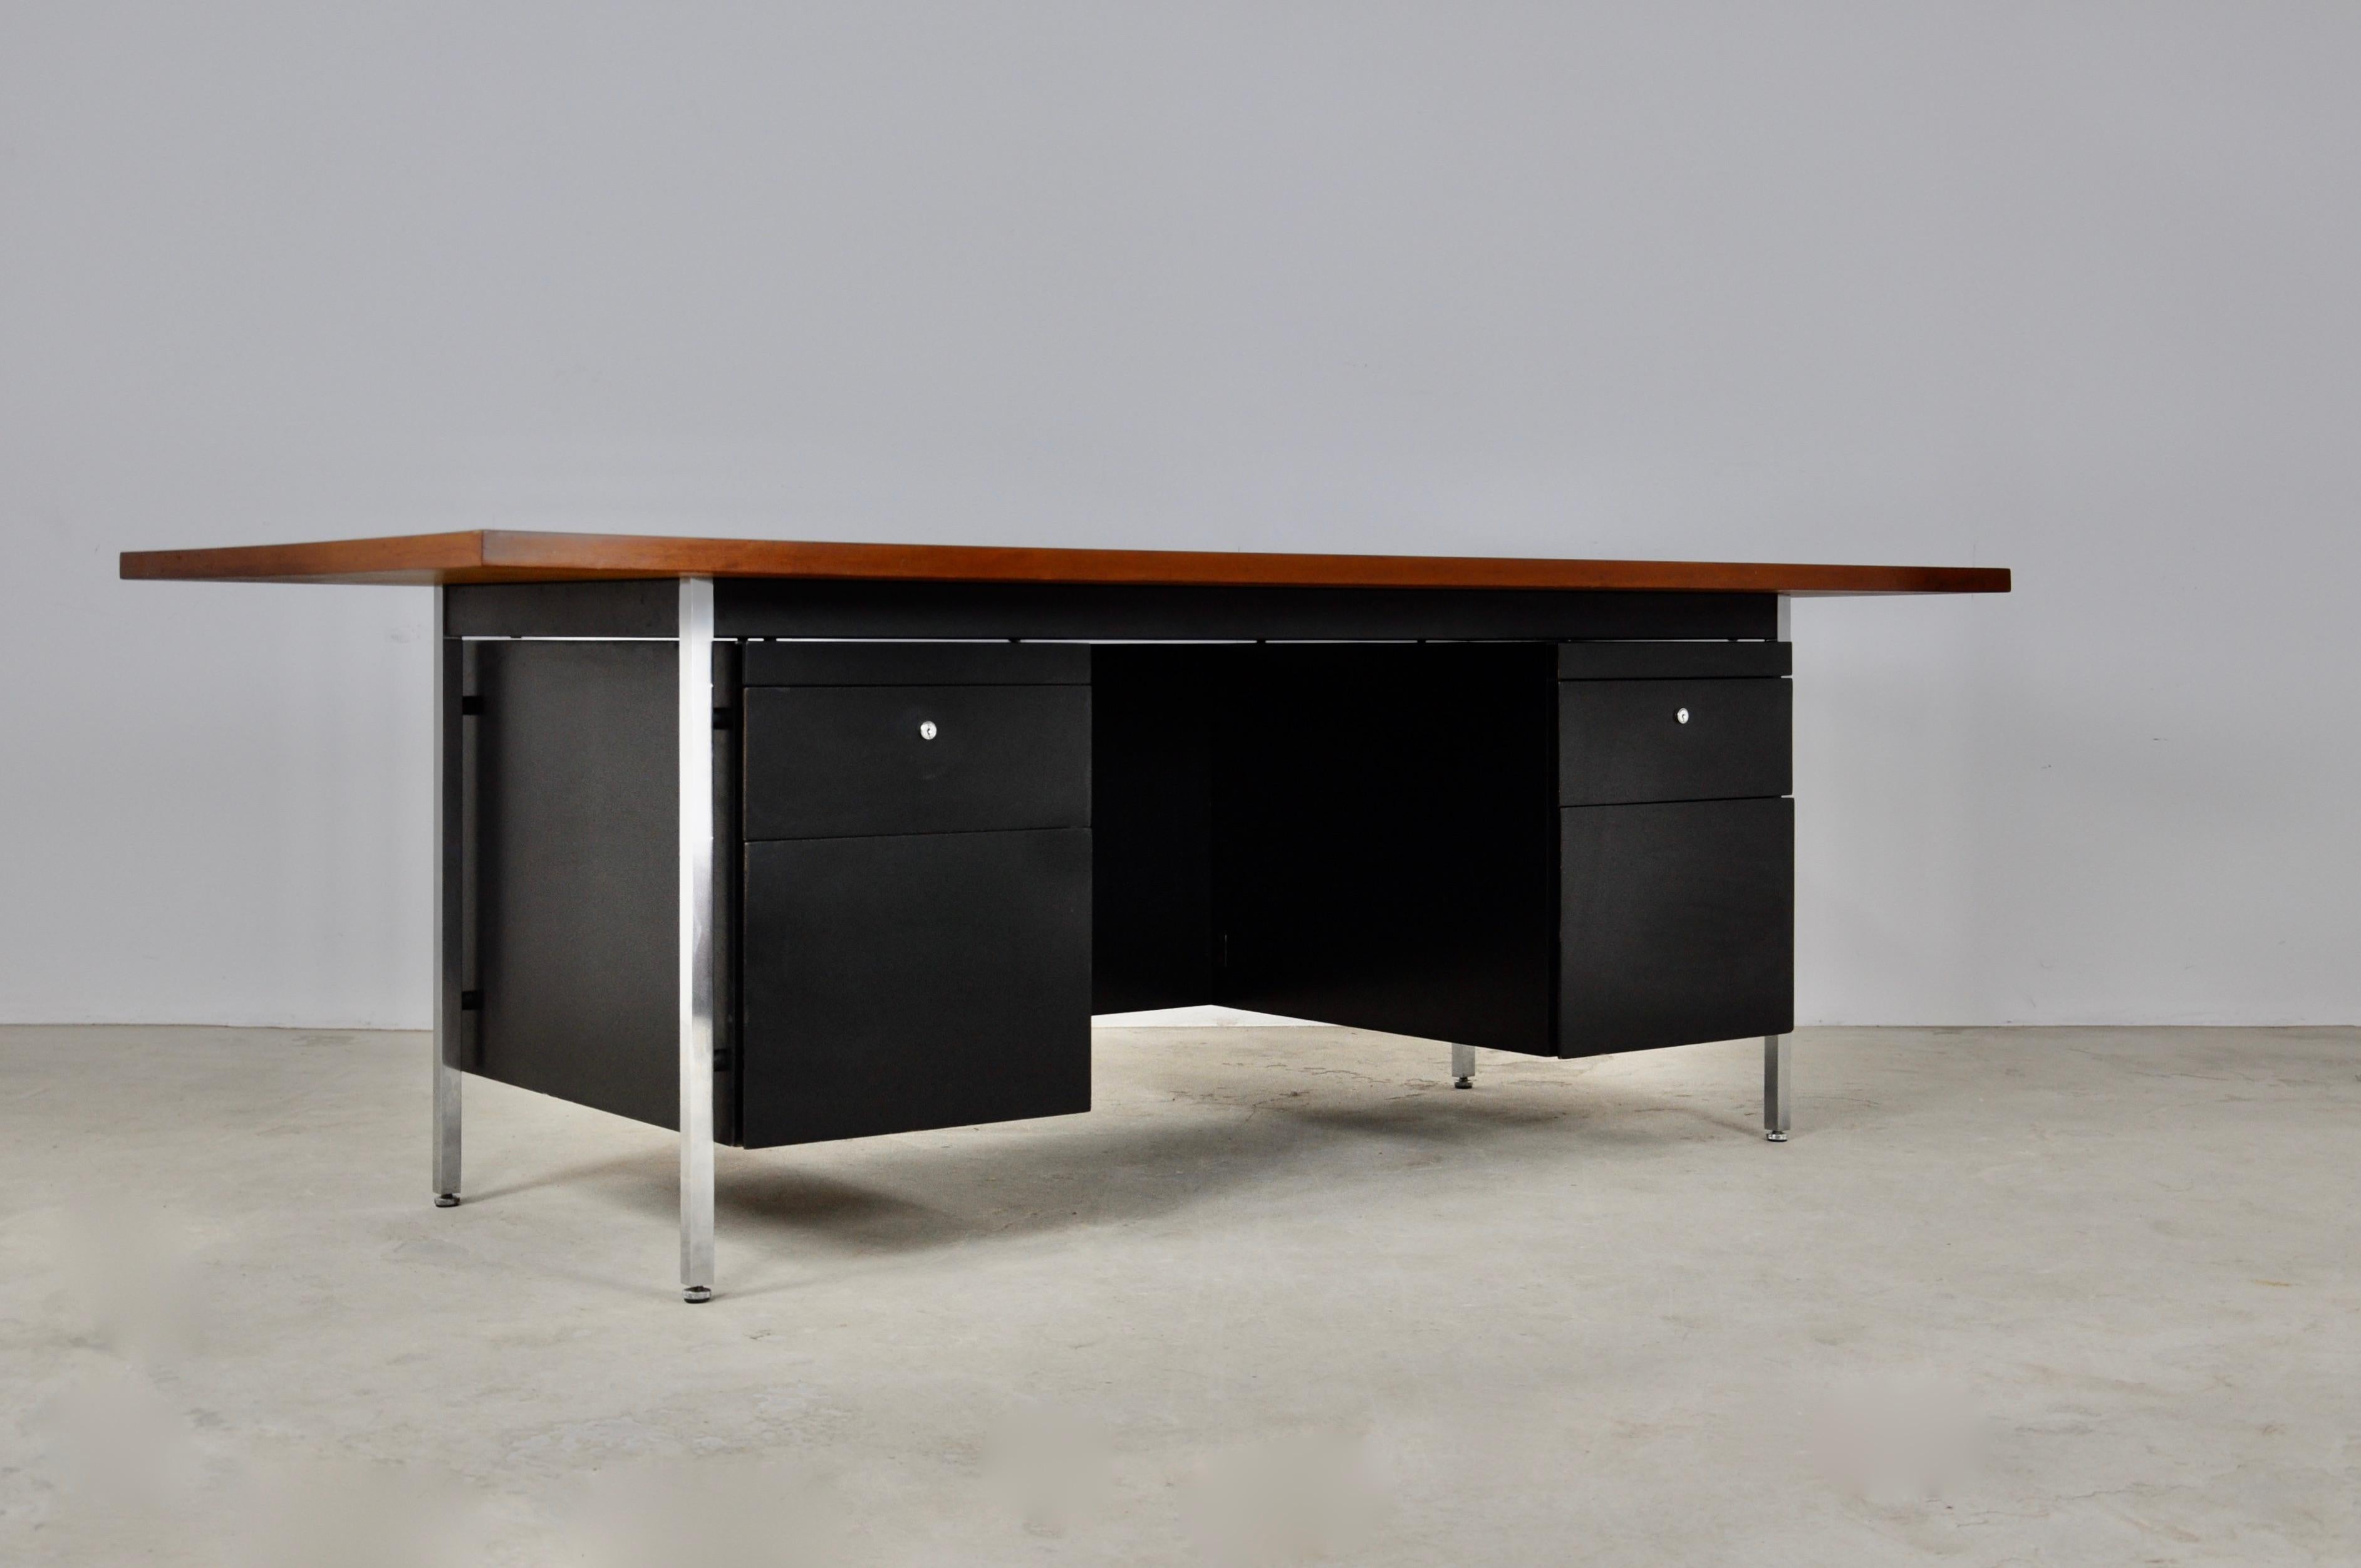 Desk composed of 2 pedestals with 3 drawers per pedestal. Foot in chrome metal. Wear due to time and age of the desk.